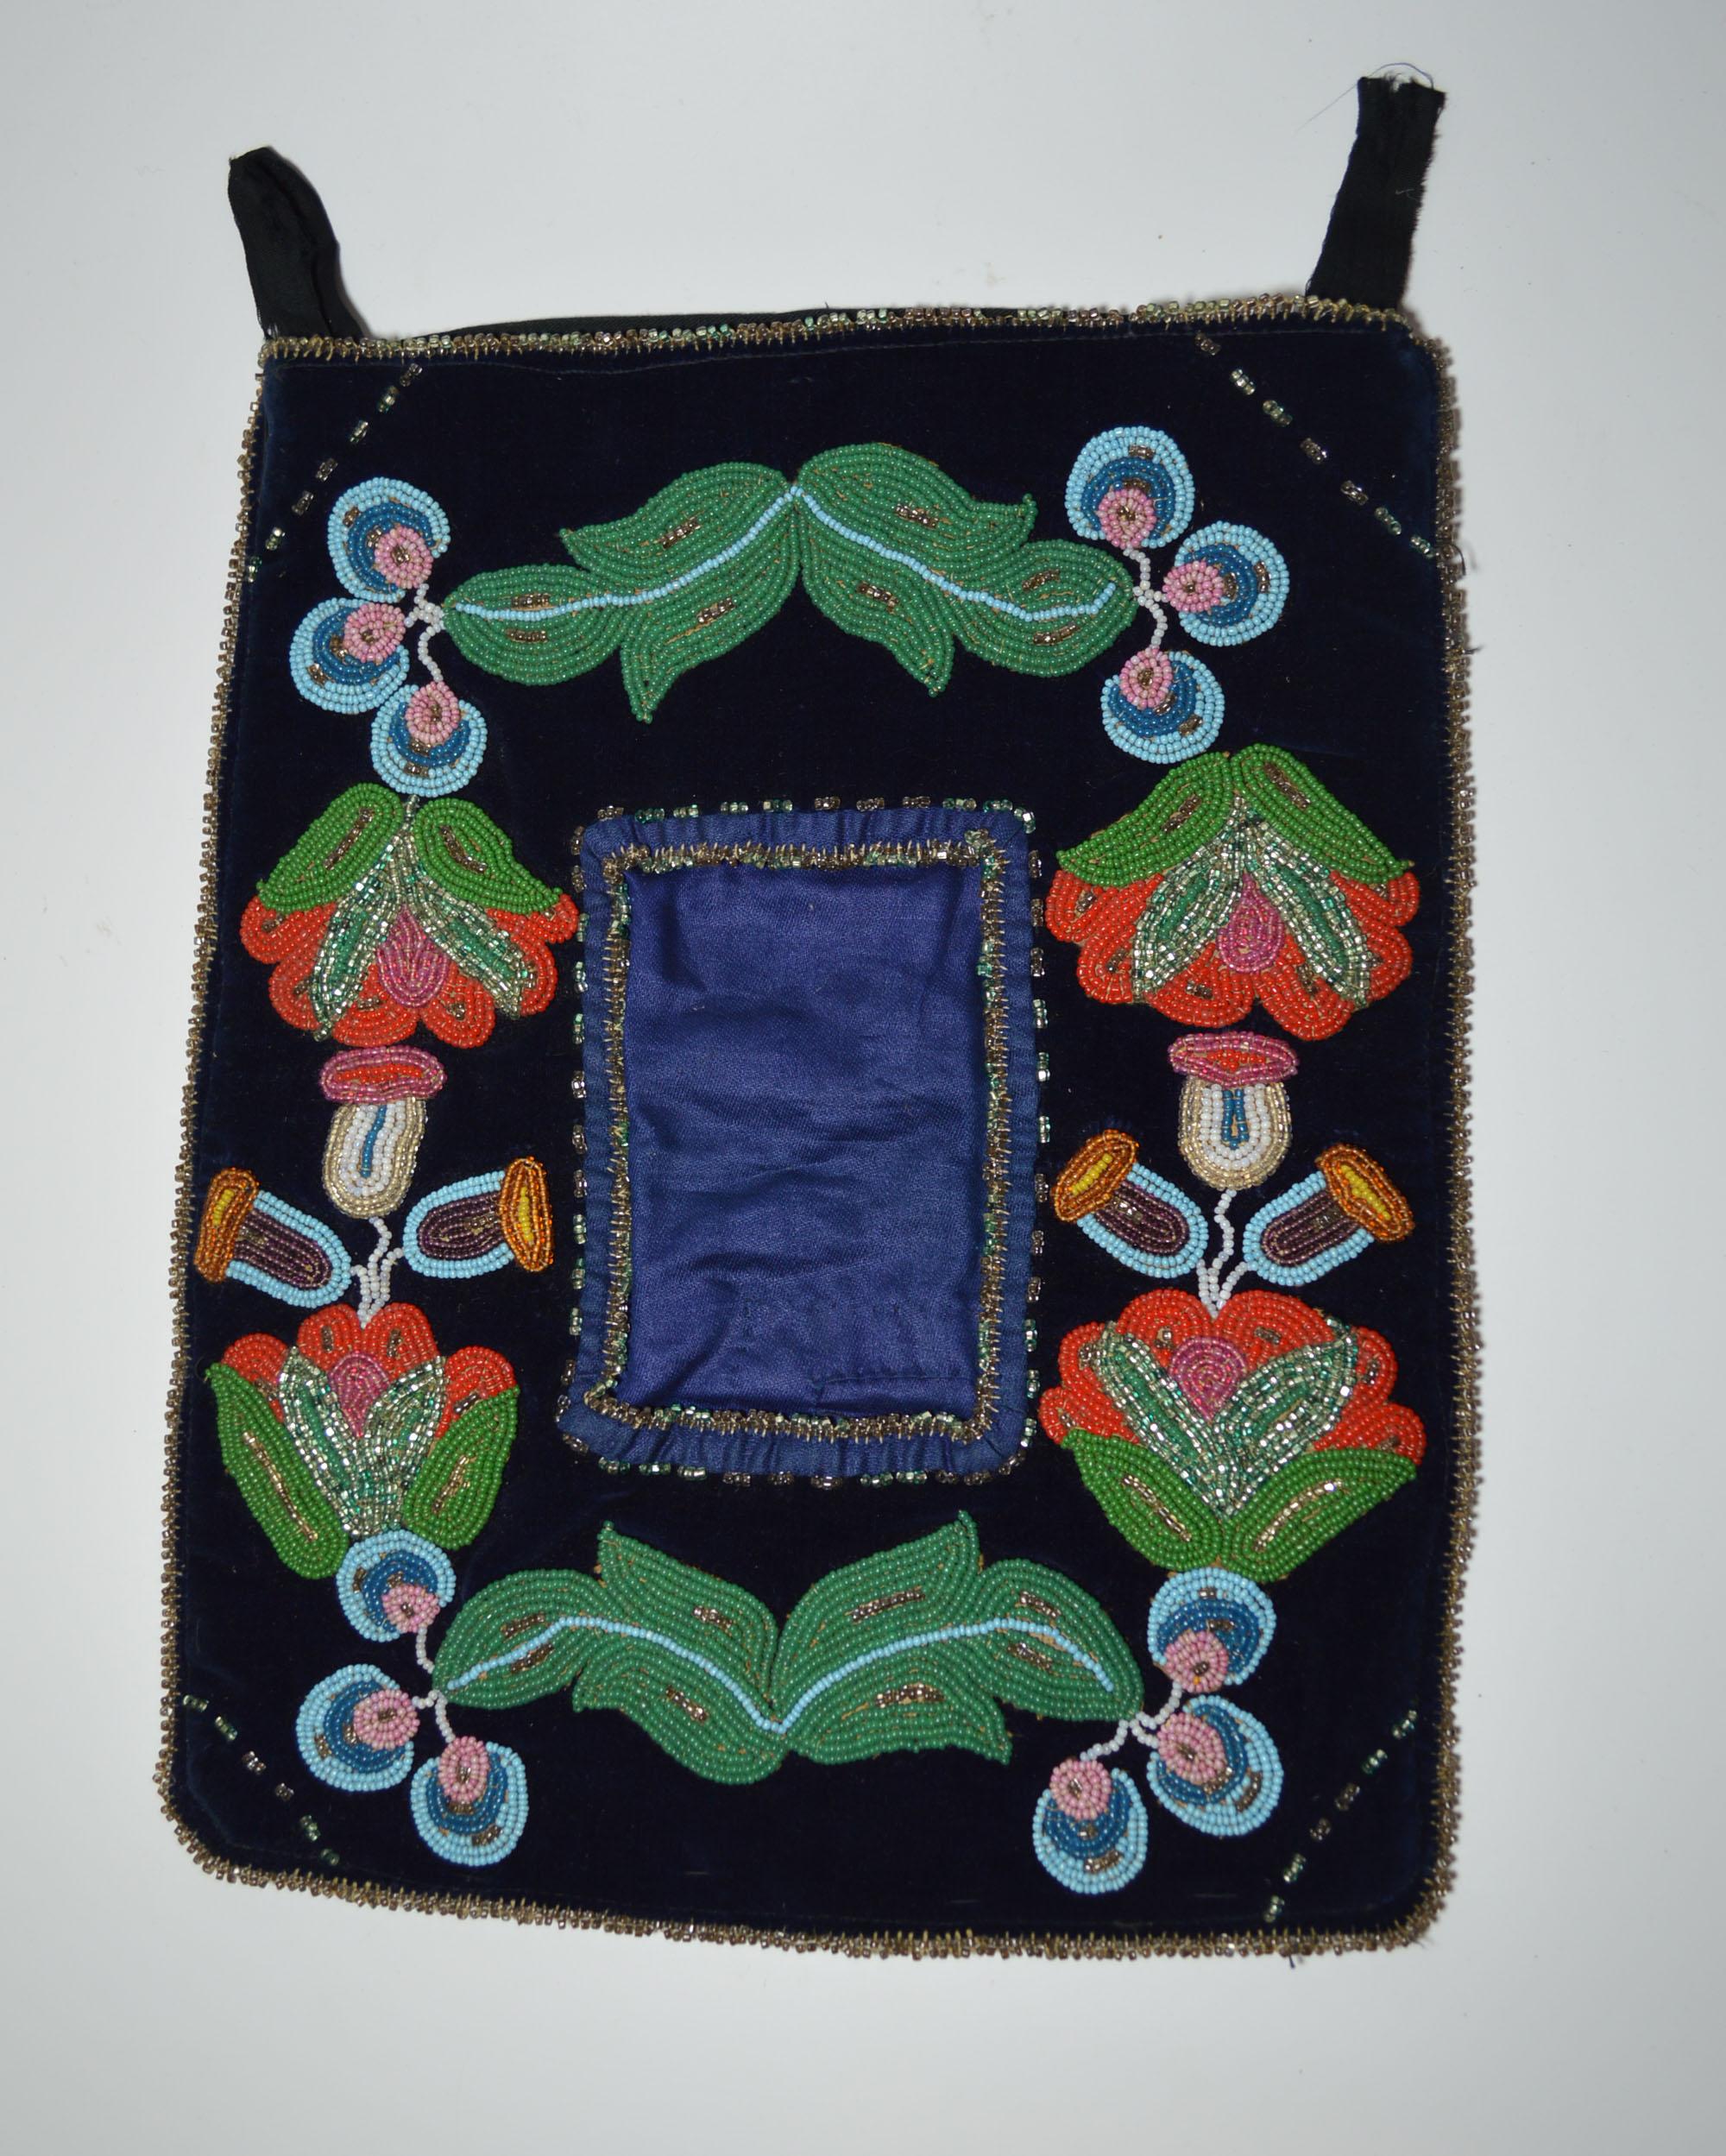 Fine Native American Indian Ojibwe beaded picture frame pocket
Finely beaded on velvet and silk 
Striking floral beadwork designs contrasting beautifully against the dark velvet background
Period Early 20th century
Condition: Minor bead work